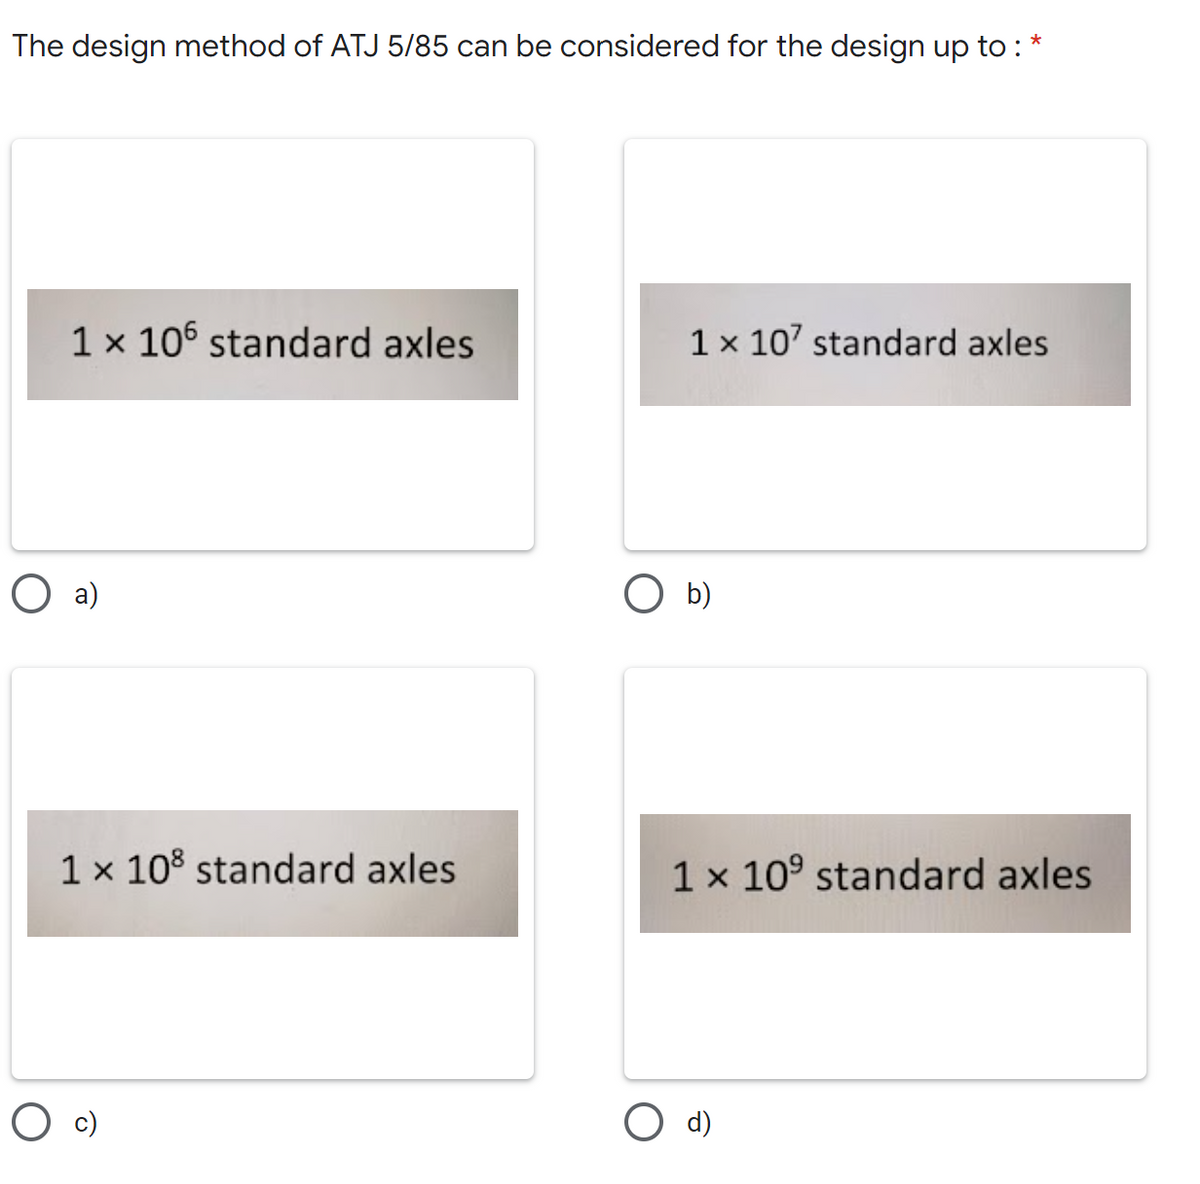 The design method of ATJ 5/85 can be considered for the design up to:
1 x 106 standard axles
1 x 107 standard axles
1 x 108 standard axles
1 x 10⁹ standard axles
O a)
O b)